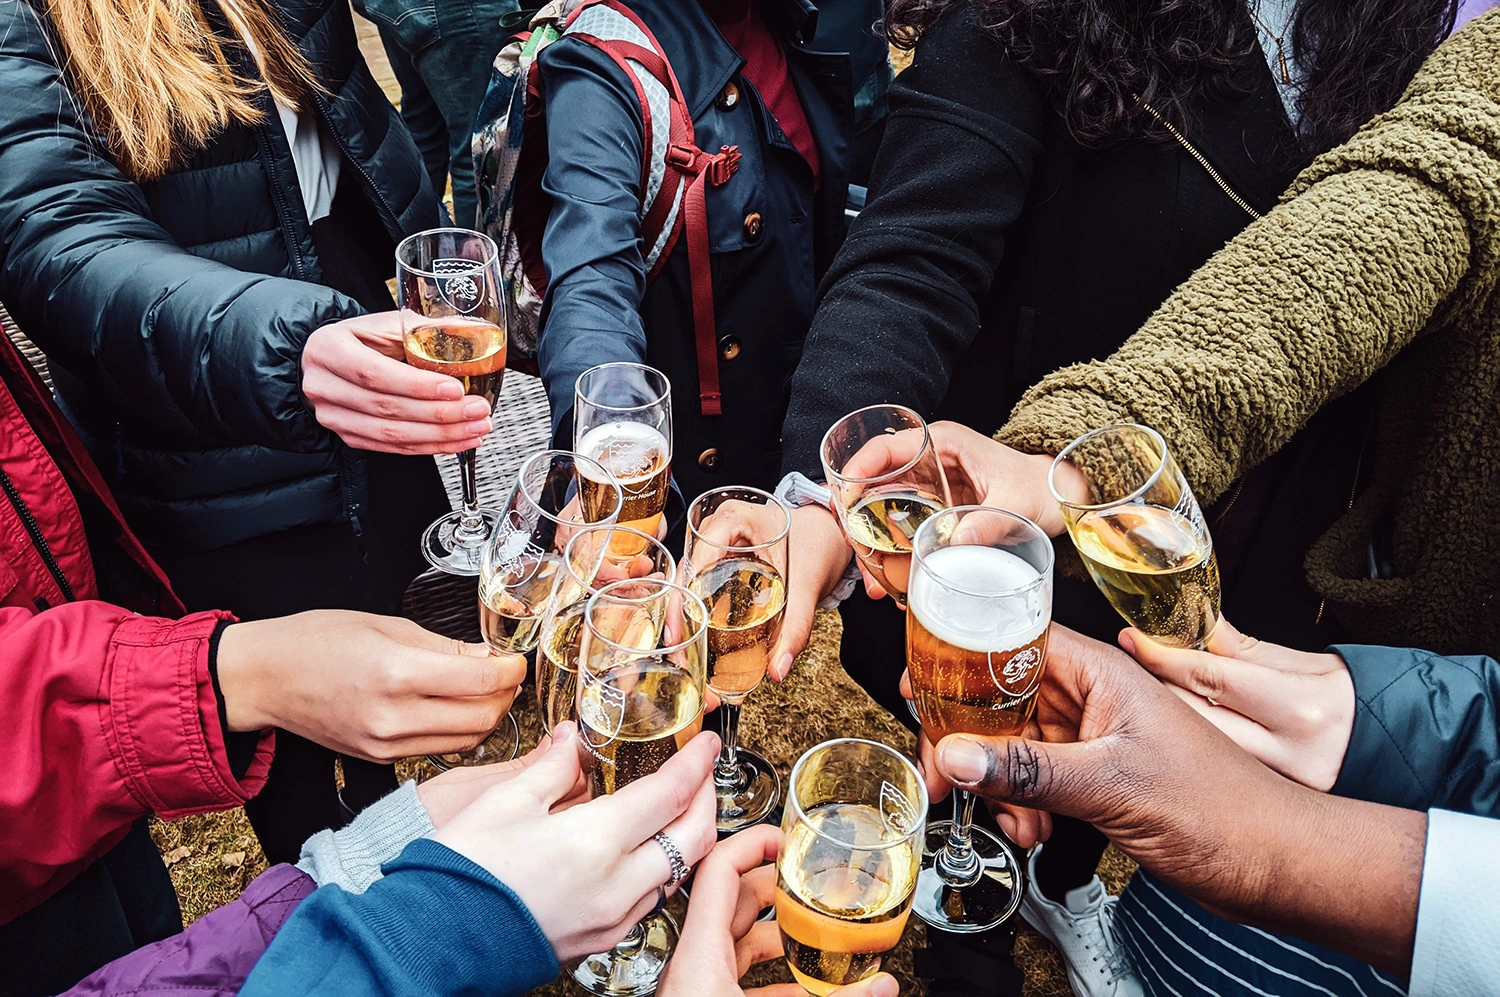 Restaurant holiday guide: A group of restaurant staff toasting with champagne glasses after a successful holiday season.